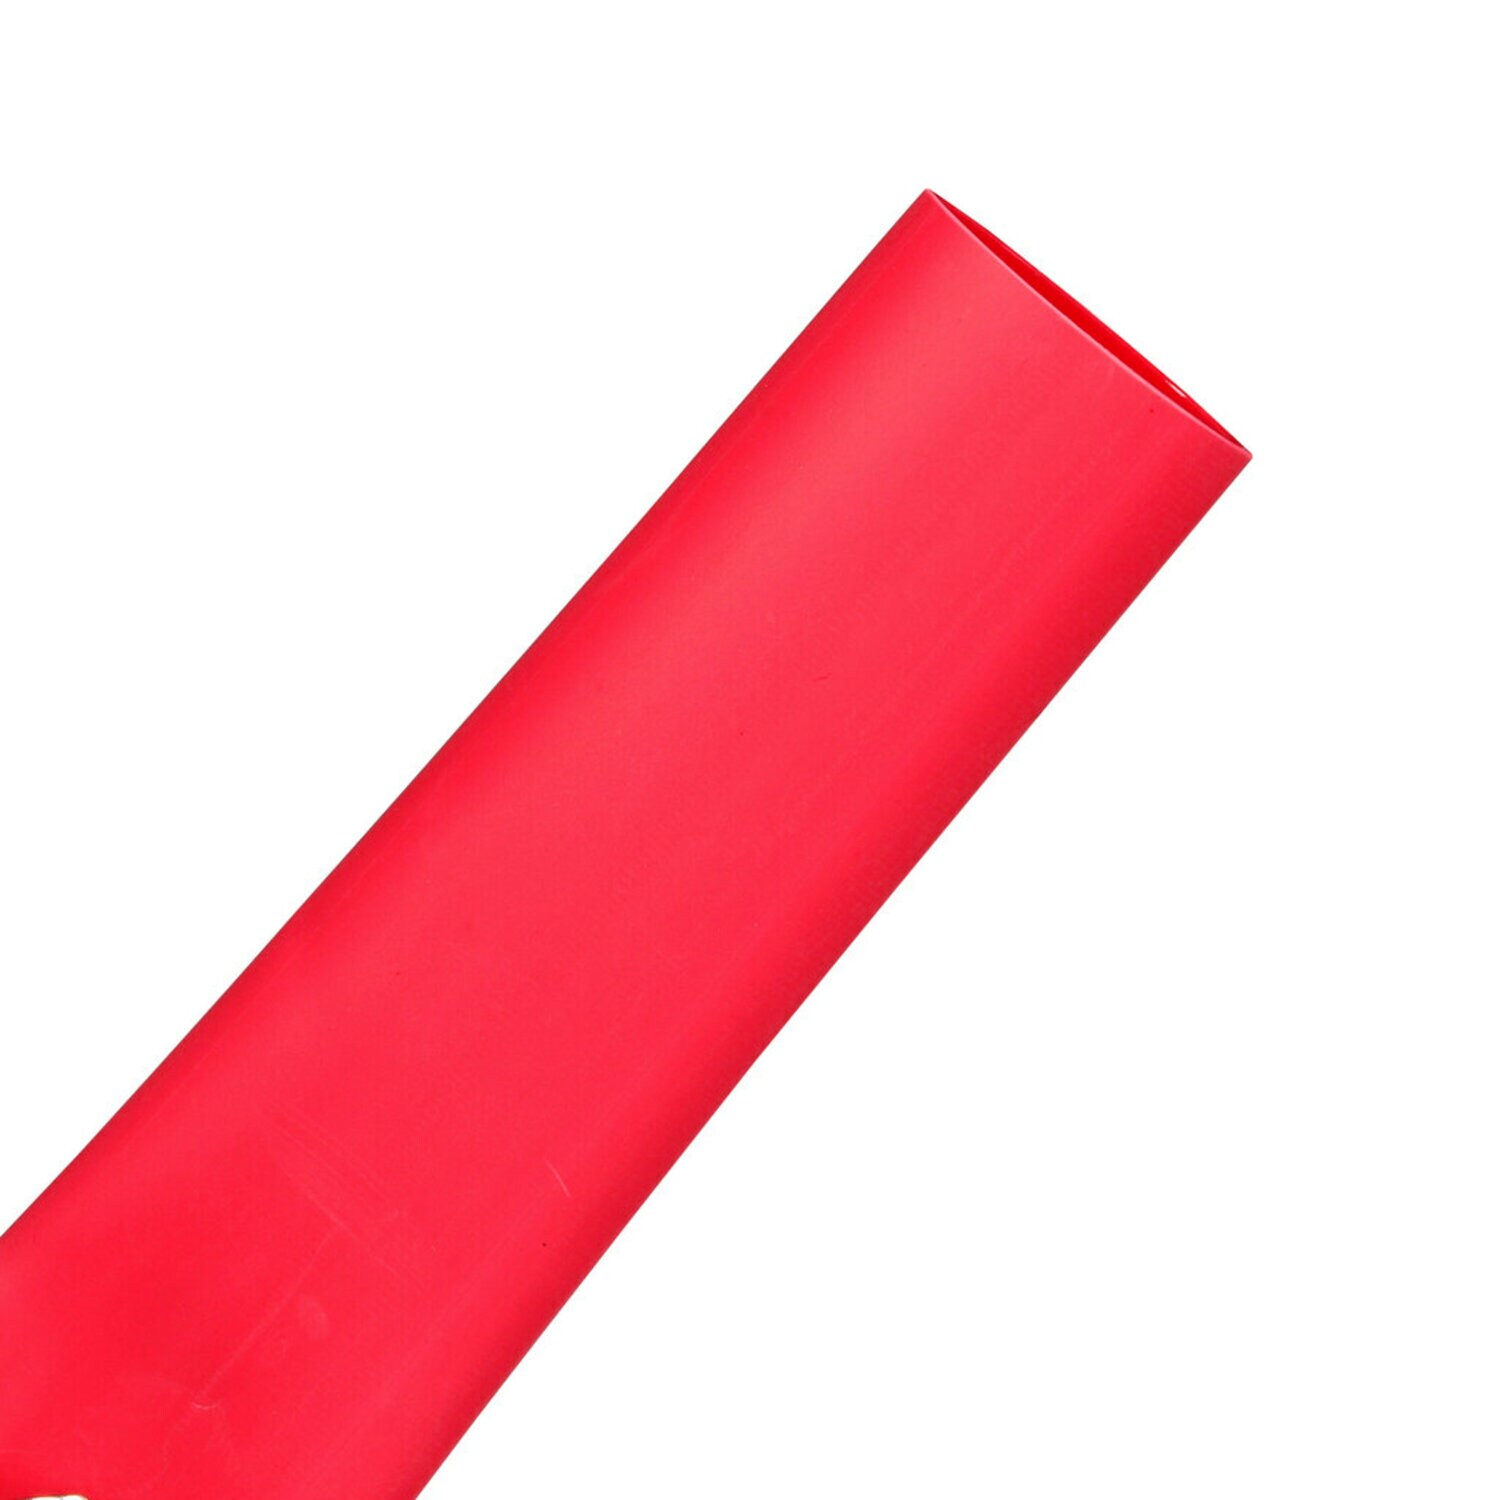 7010398853 - 3M Thin-Wall Heat Shrink Tubing EPS-300, Adhesive-Lined, 1-48"-Red-24
Pcs, 48 in length sticks, 24 pieces/case